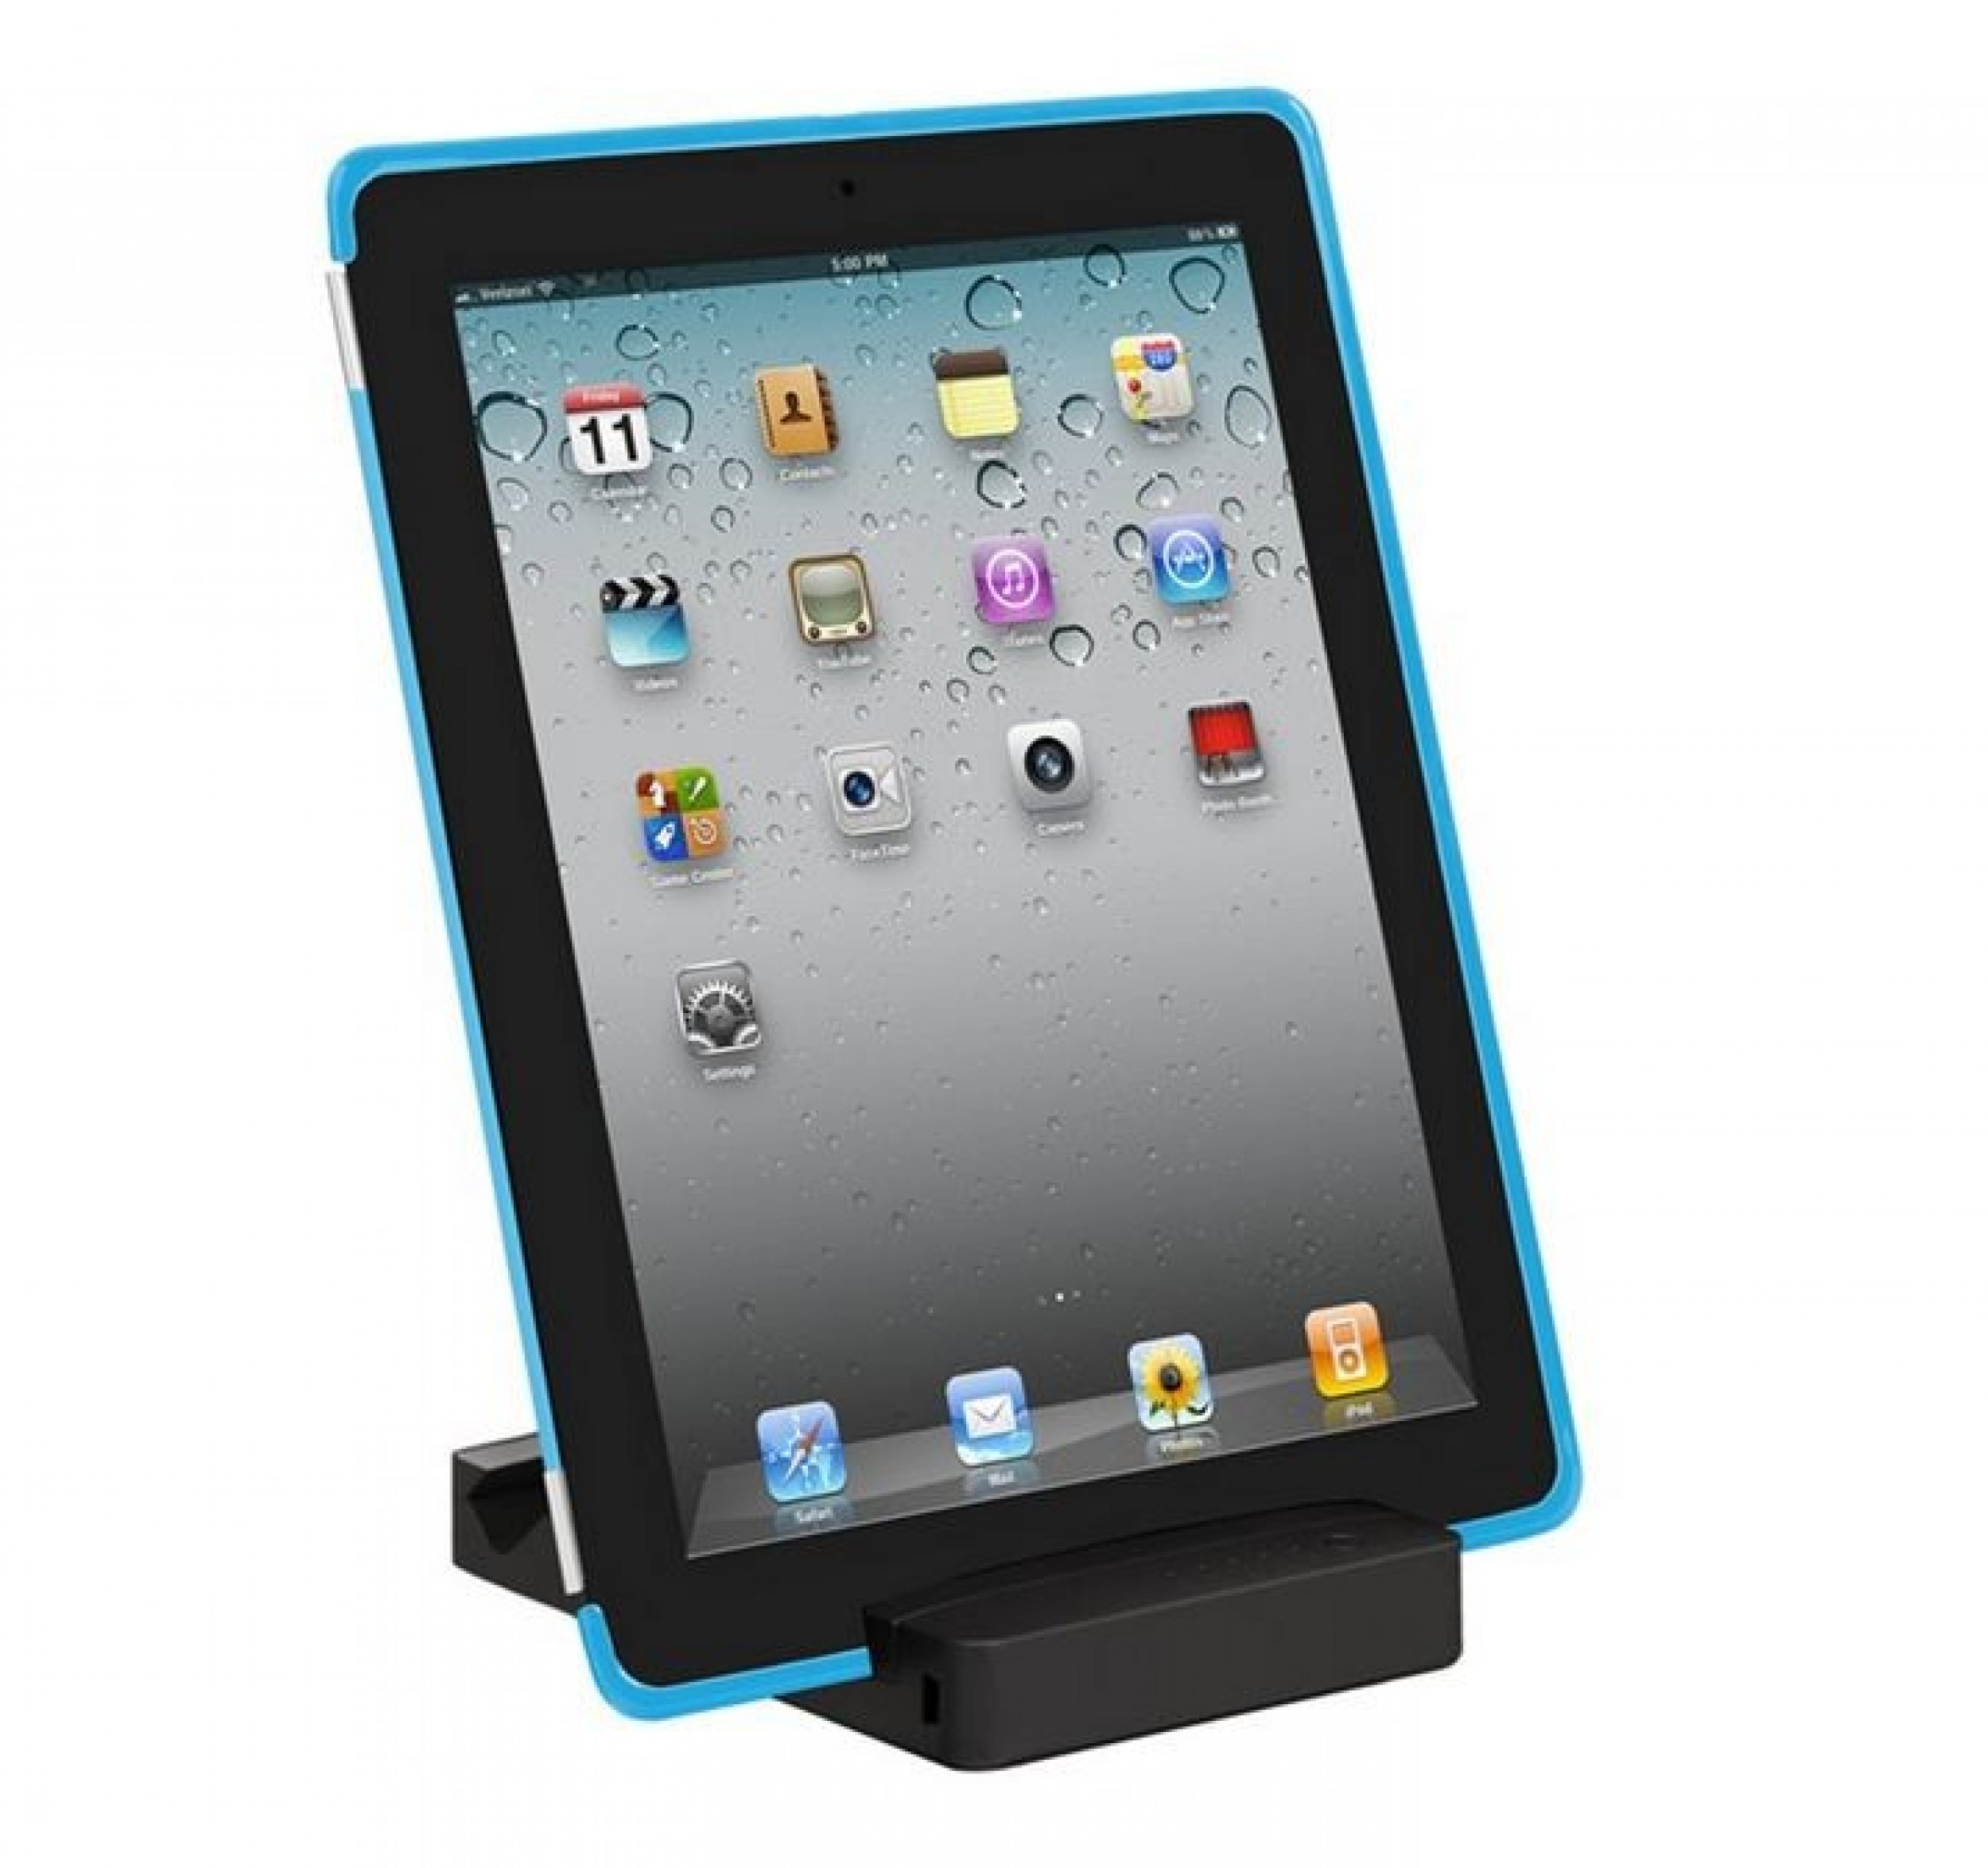 HyperJuice Stand for New iPad quot3quot Review